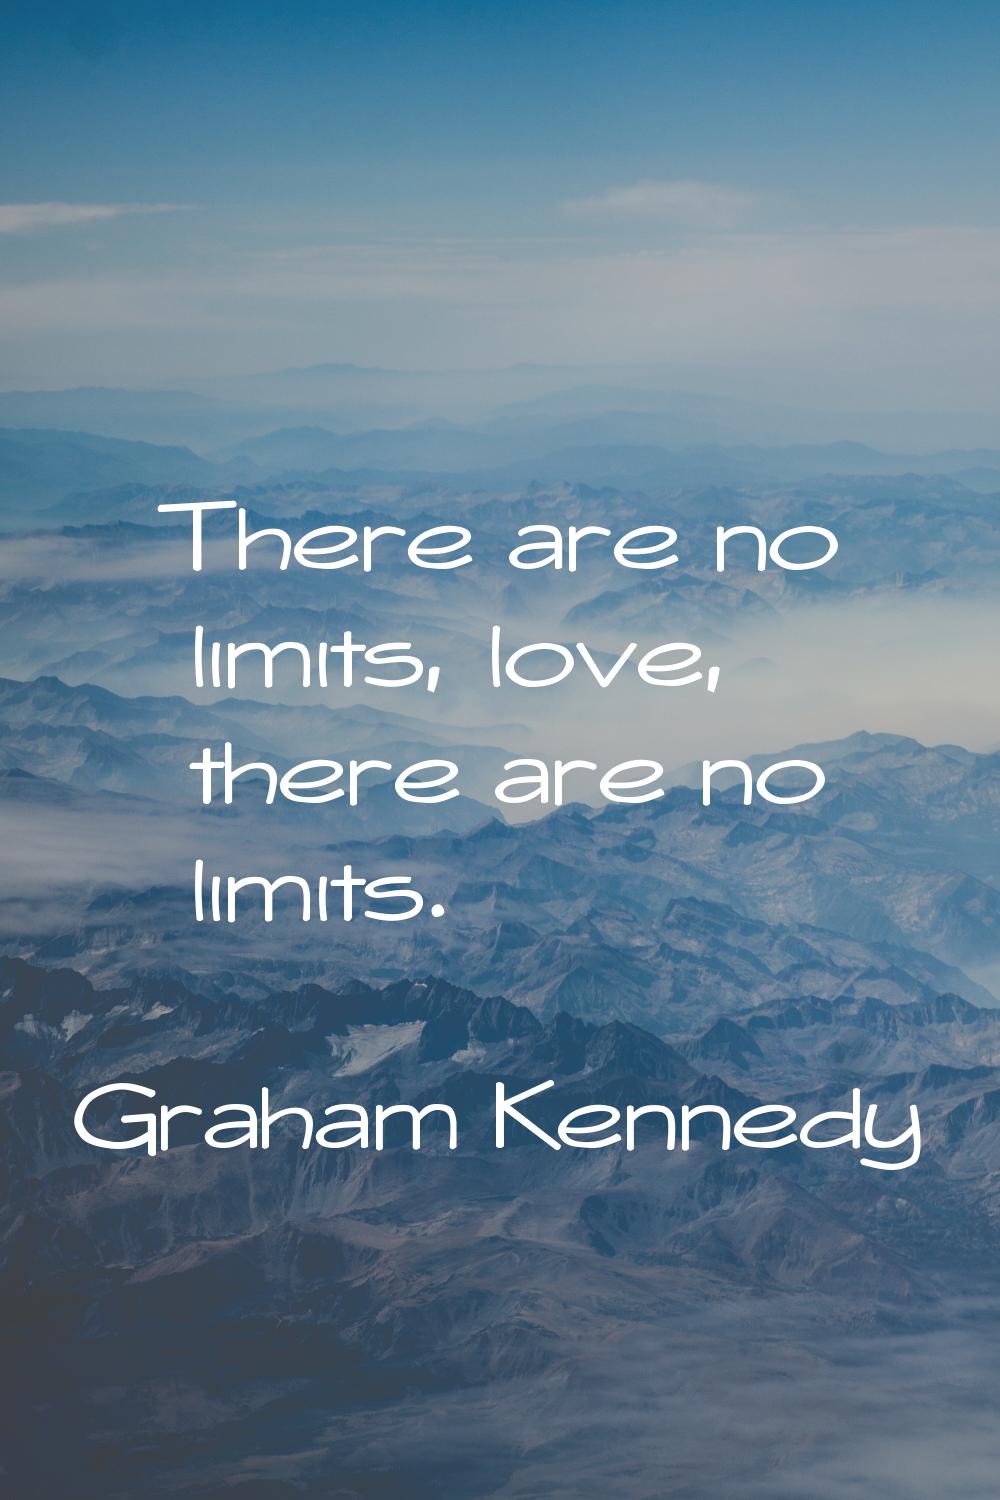 There are no limits, love, there are no limits.